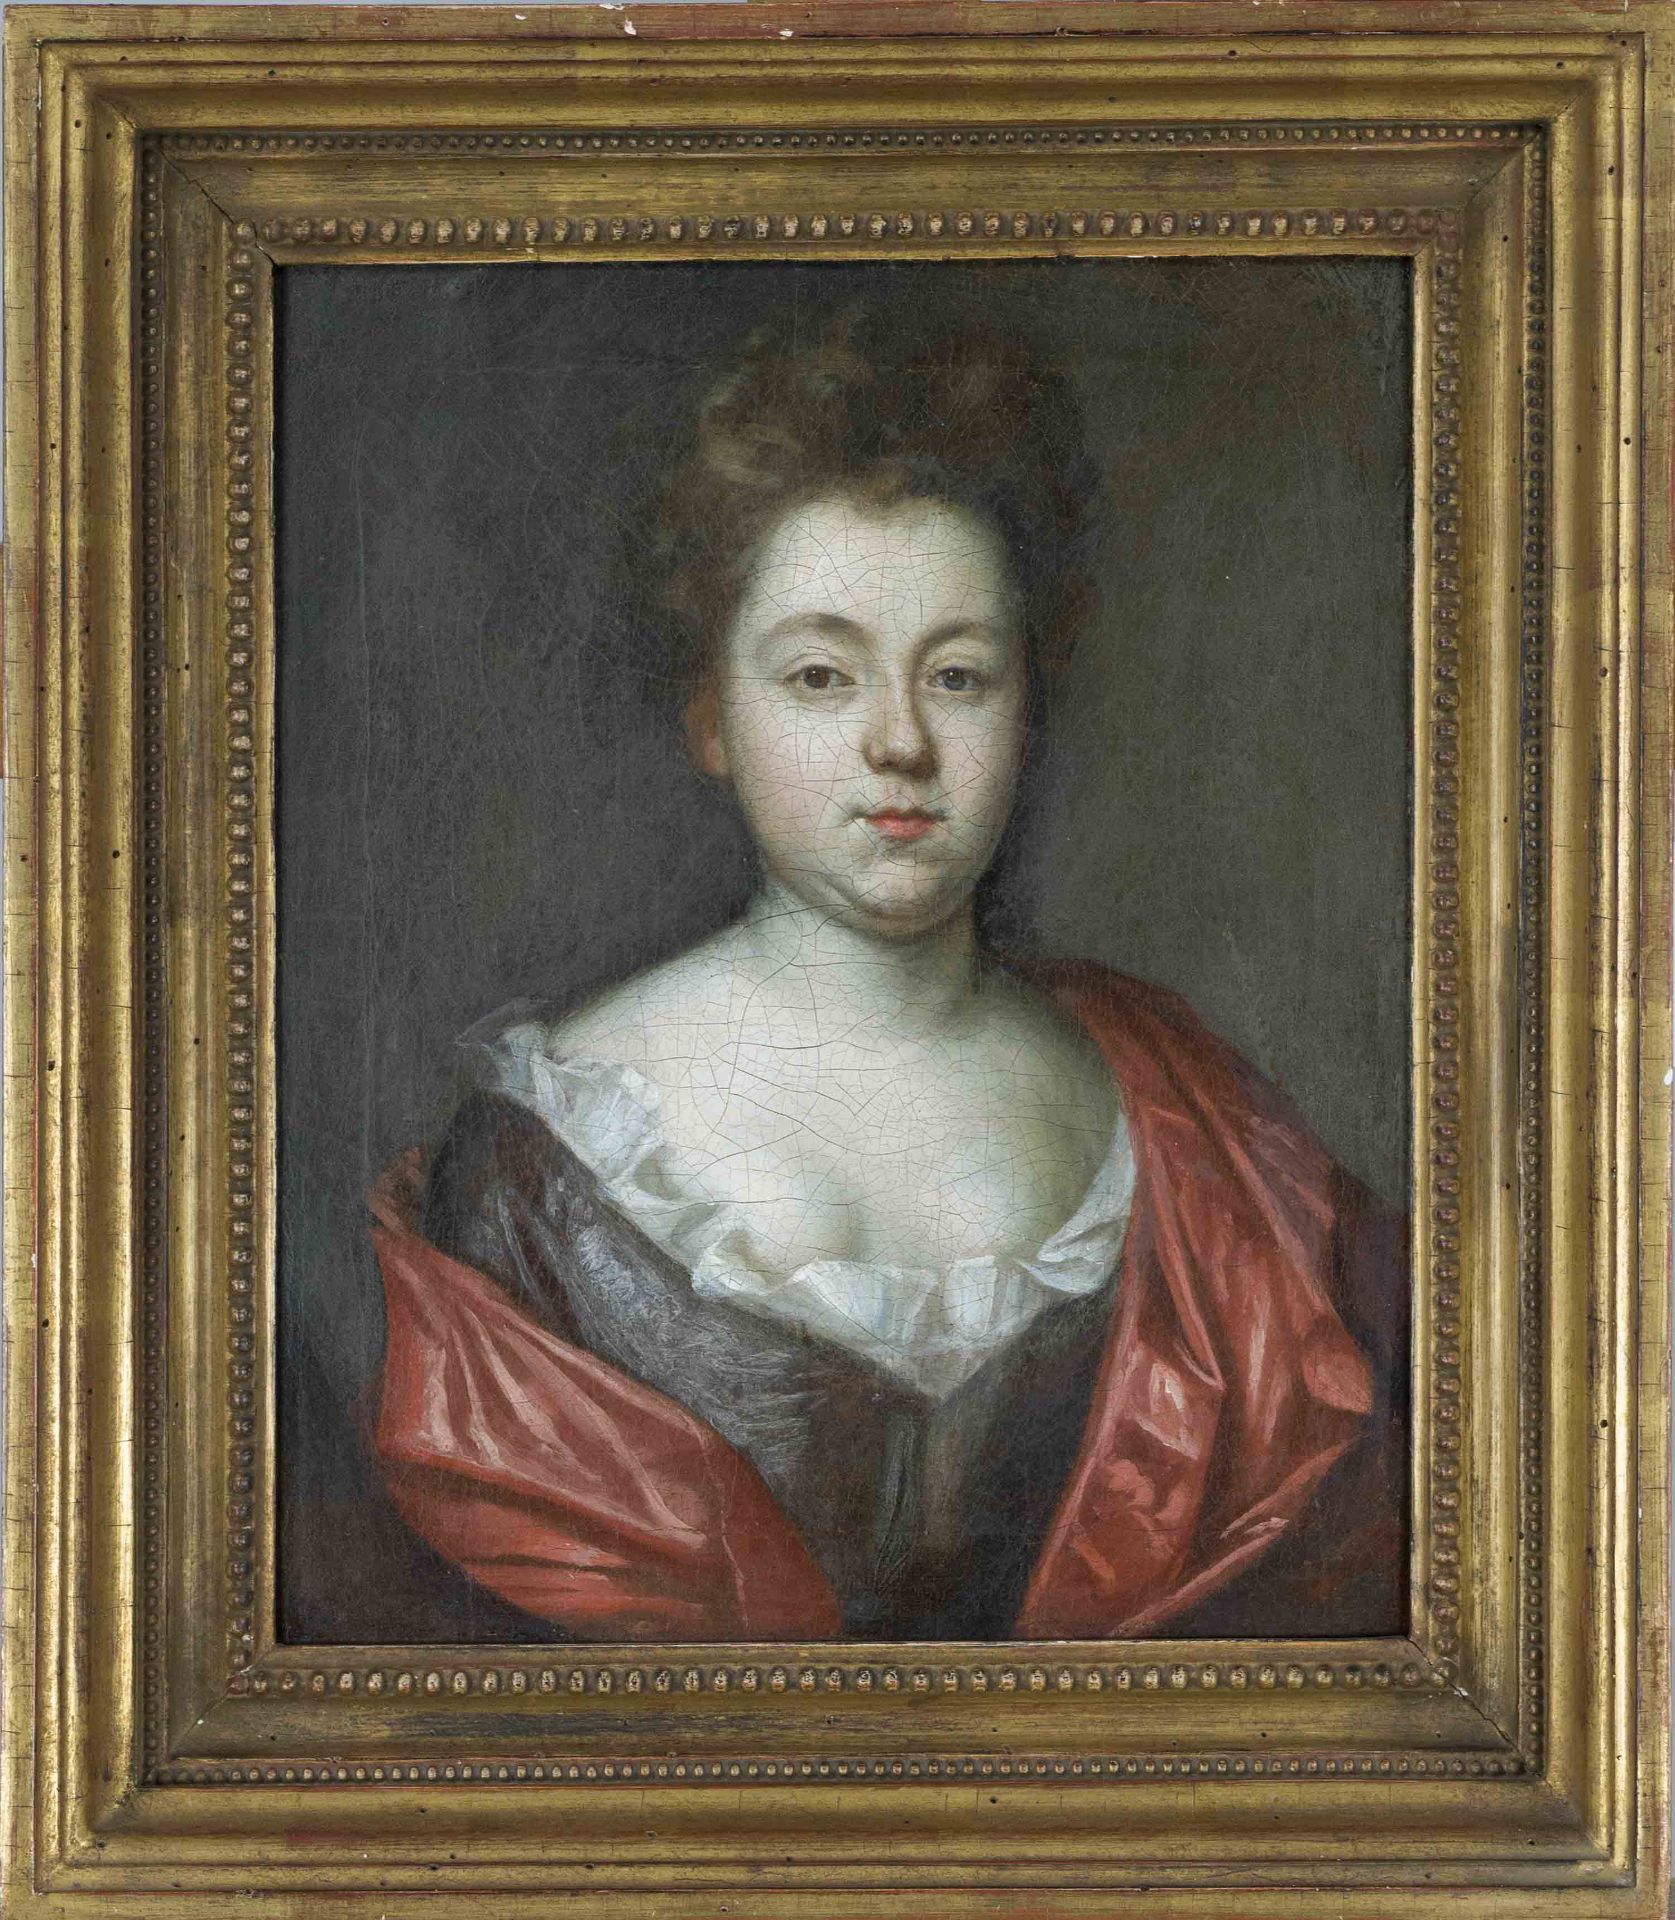 Pierre Mignard (1612-1695), Succession, Portrait of a Lady, unsigned, verso inscribed on label